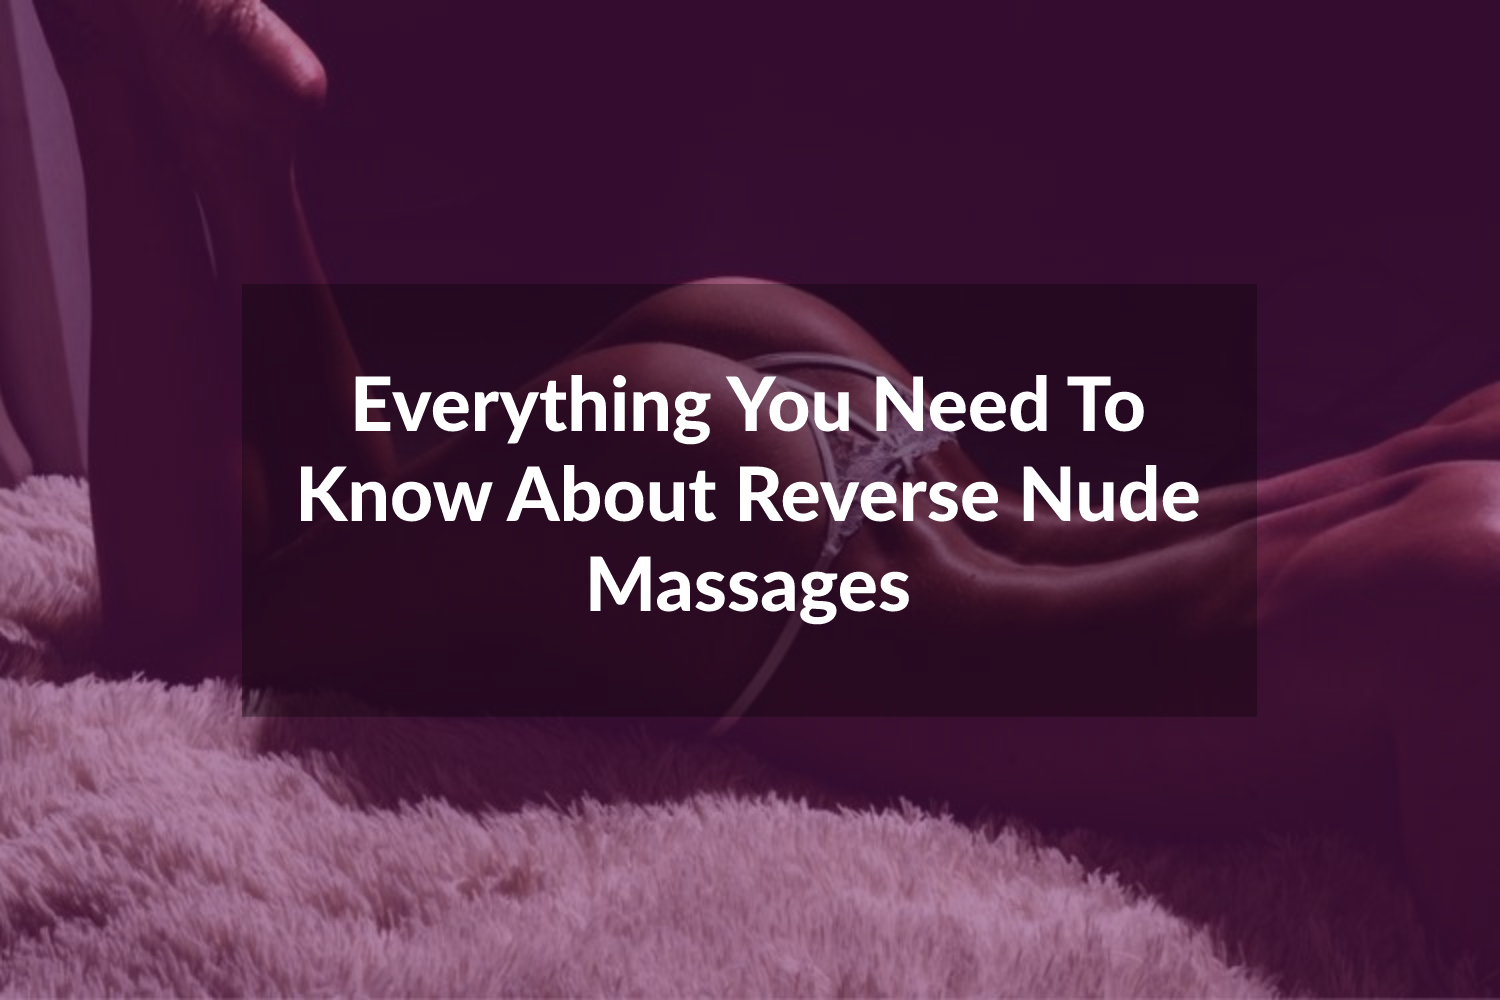 Everything You Need To Know About Reverse Nude Massages